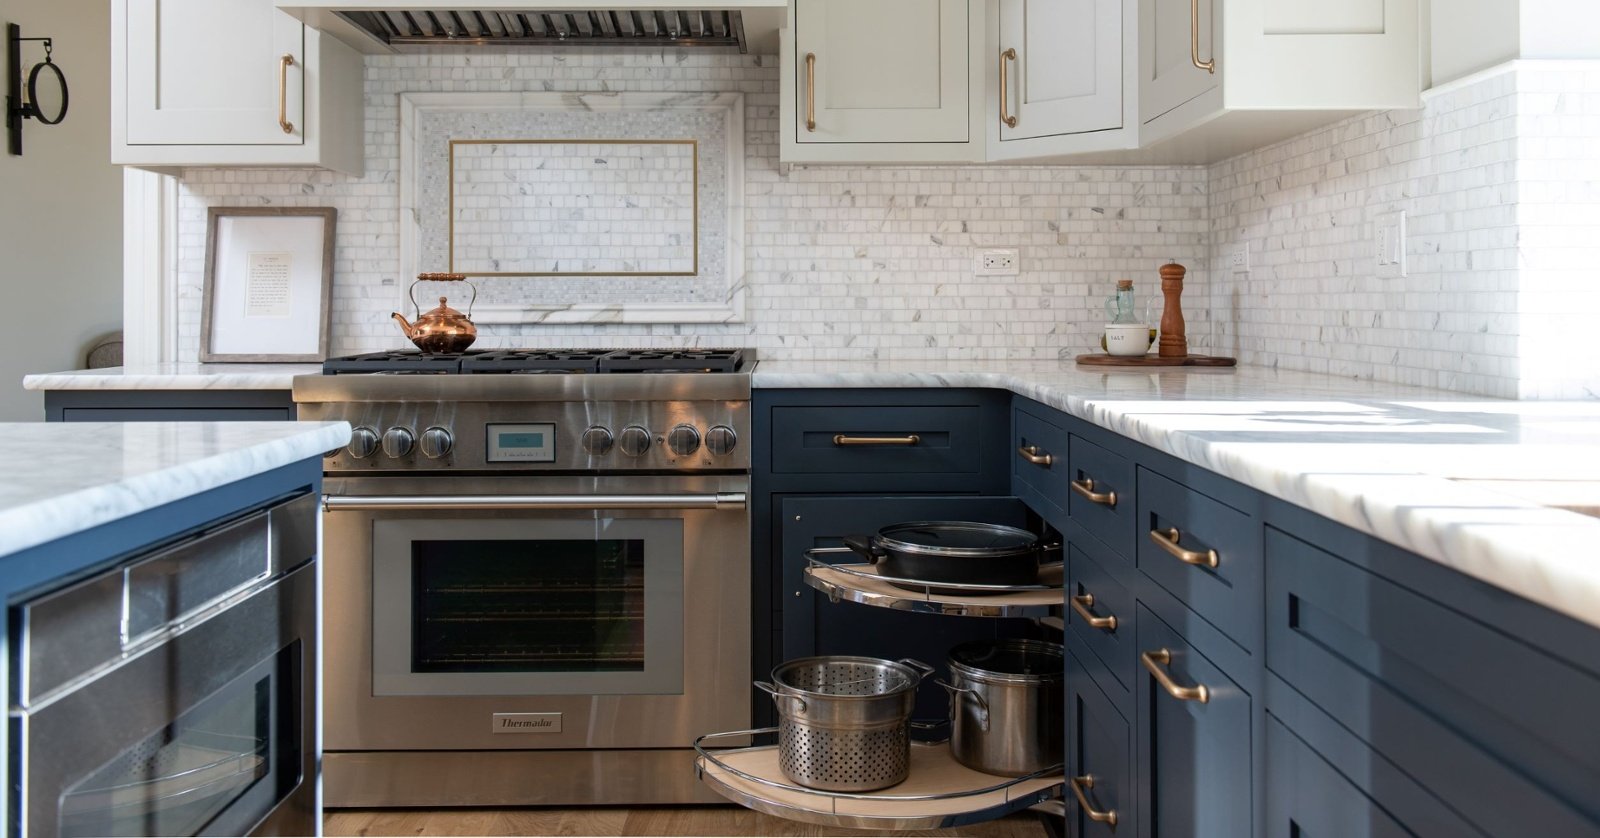 Top 13 Must-Have Kitchen Cabinet Accessories for Your Kitchen Remodel